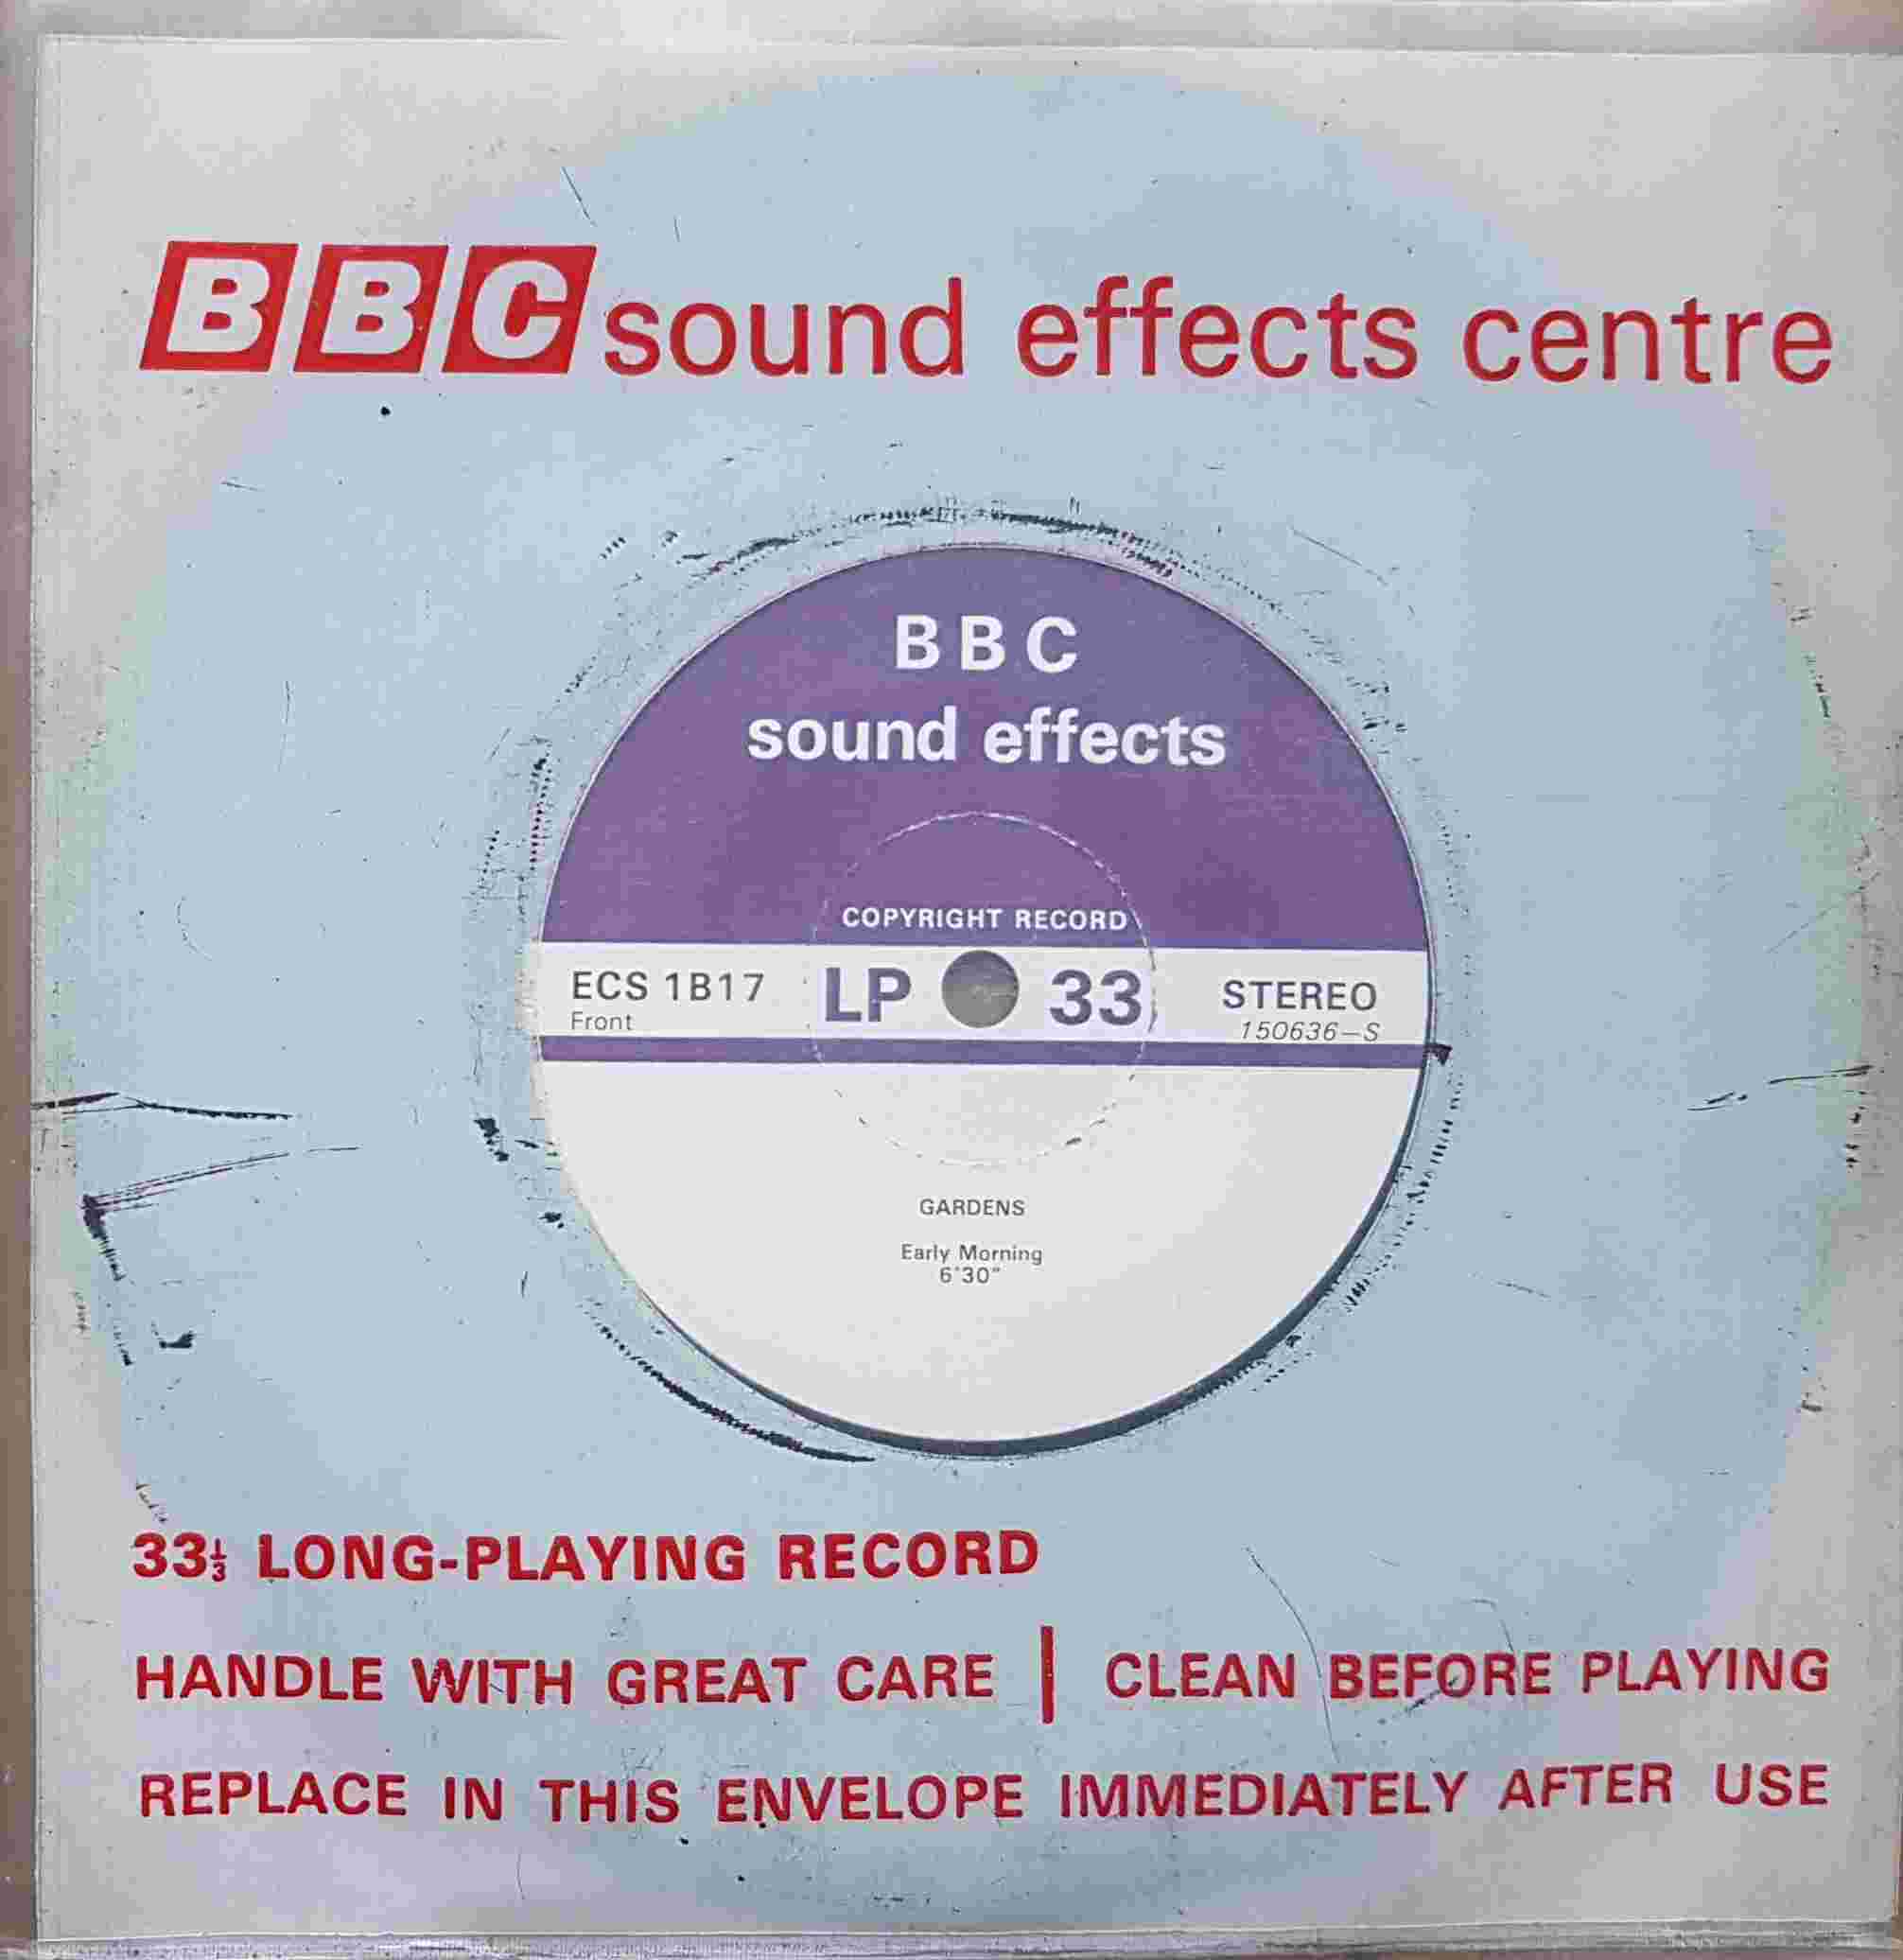 Picture of ECS 1B17 Gardens by artist Not registered from the BBC records and Tapes library